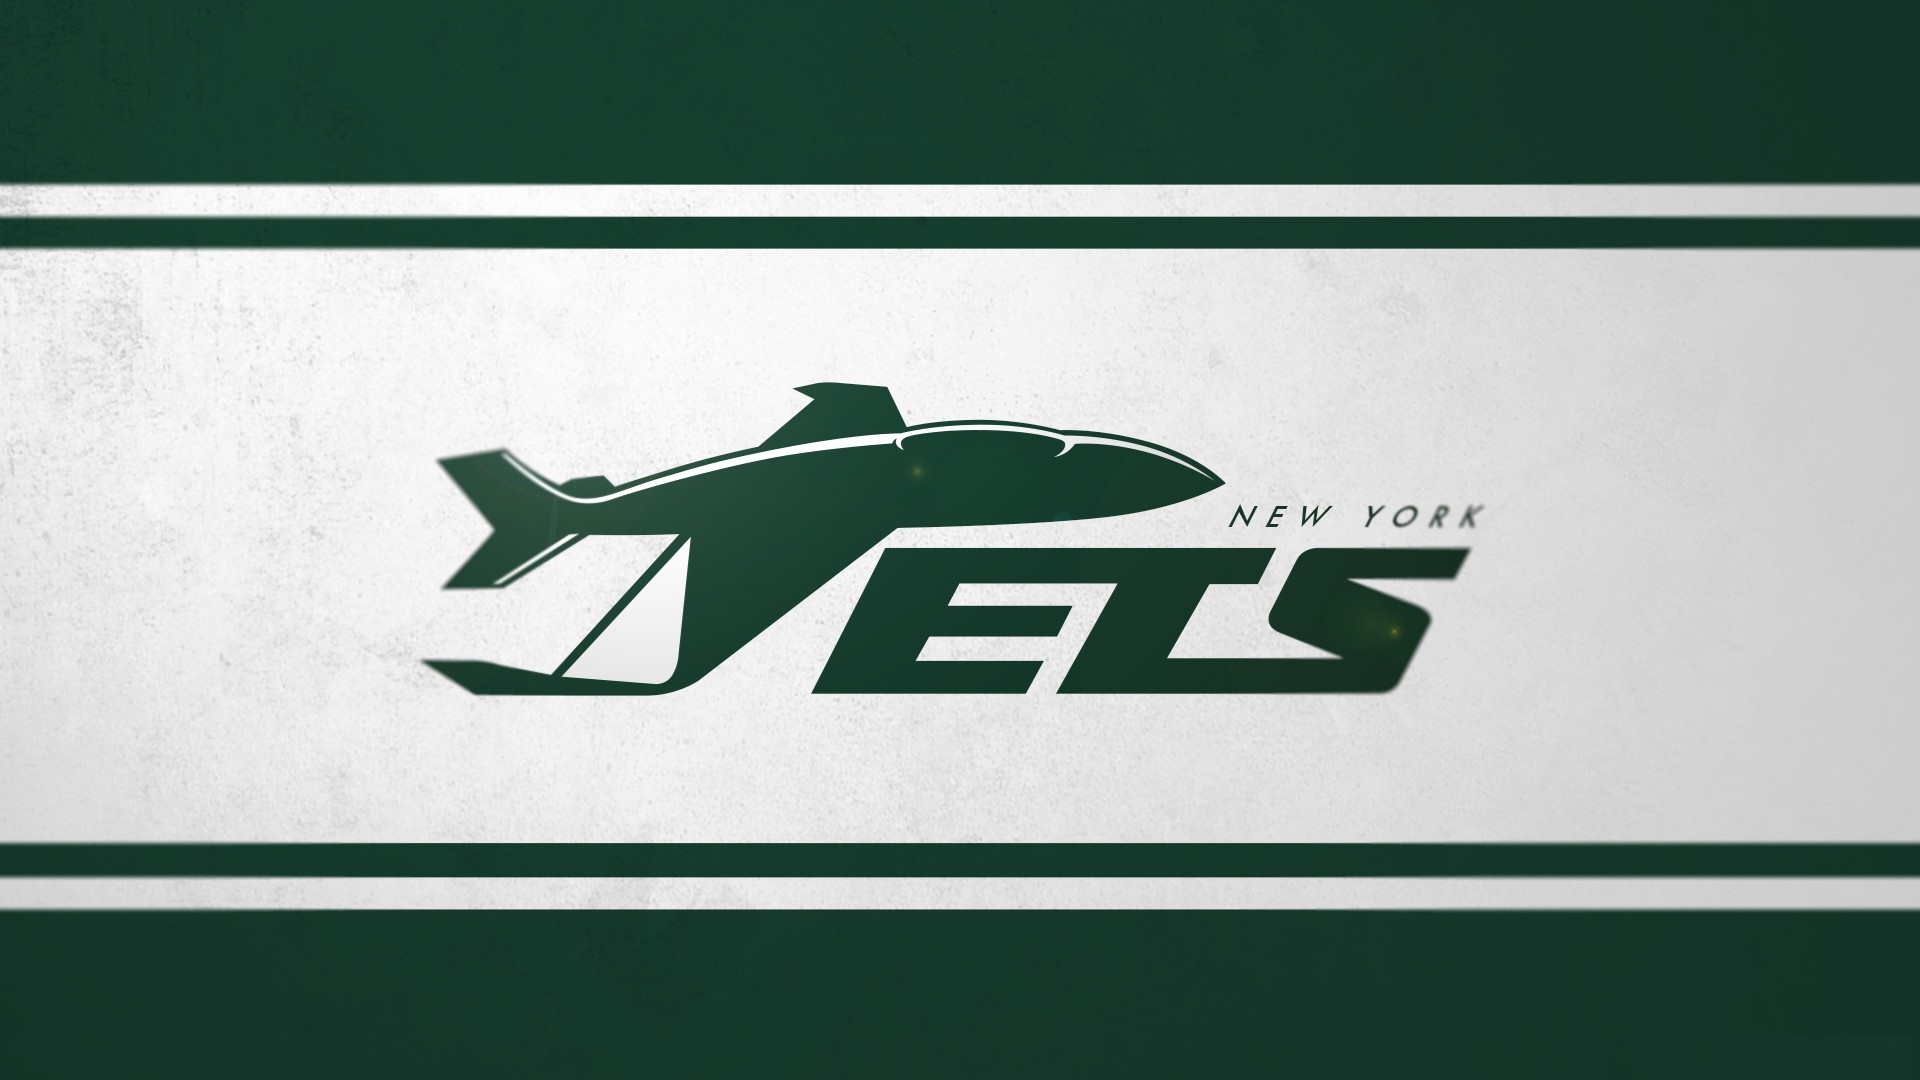 Wallpapers HD New York Jets with resolution 1920x1080 pixel. You can make this wallpaper for your Mac or Windows Desktop Background, iPhone, Android or Tablet and another Smartphone device